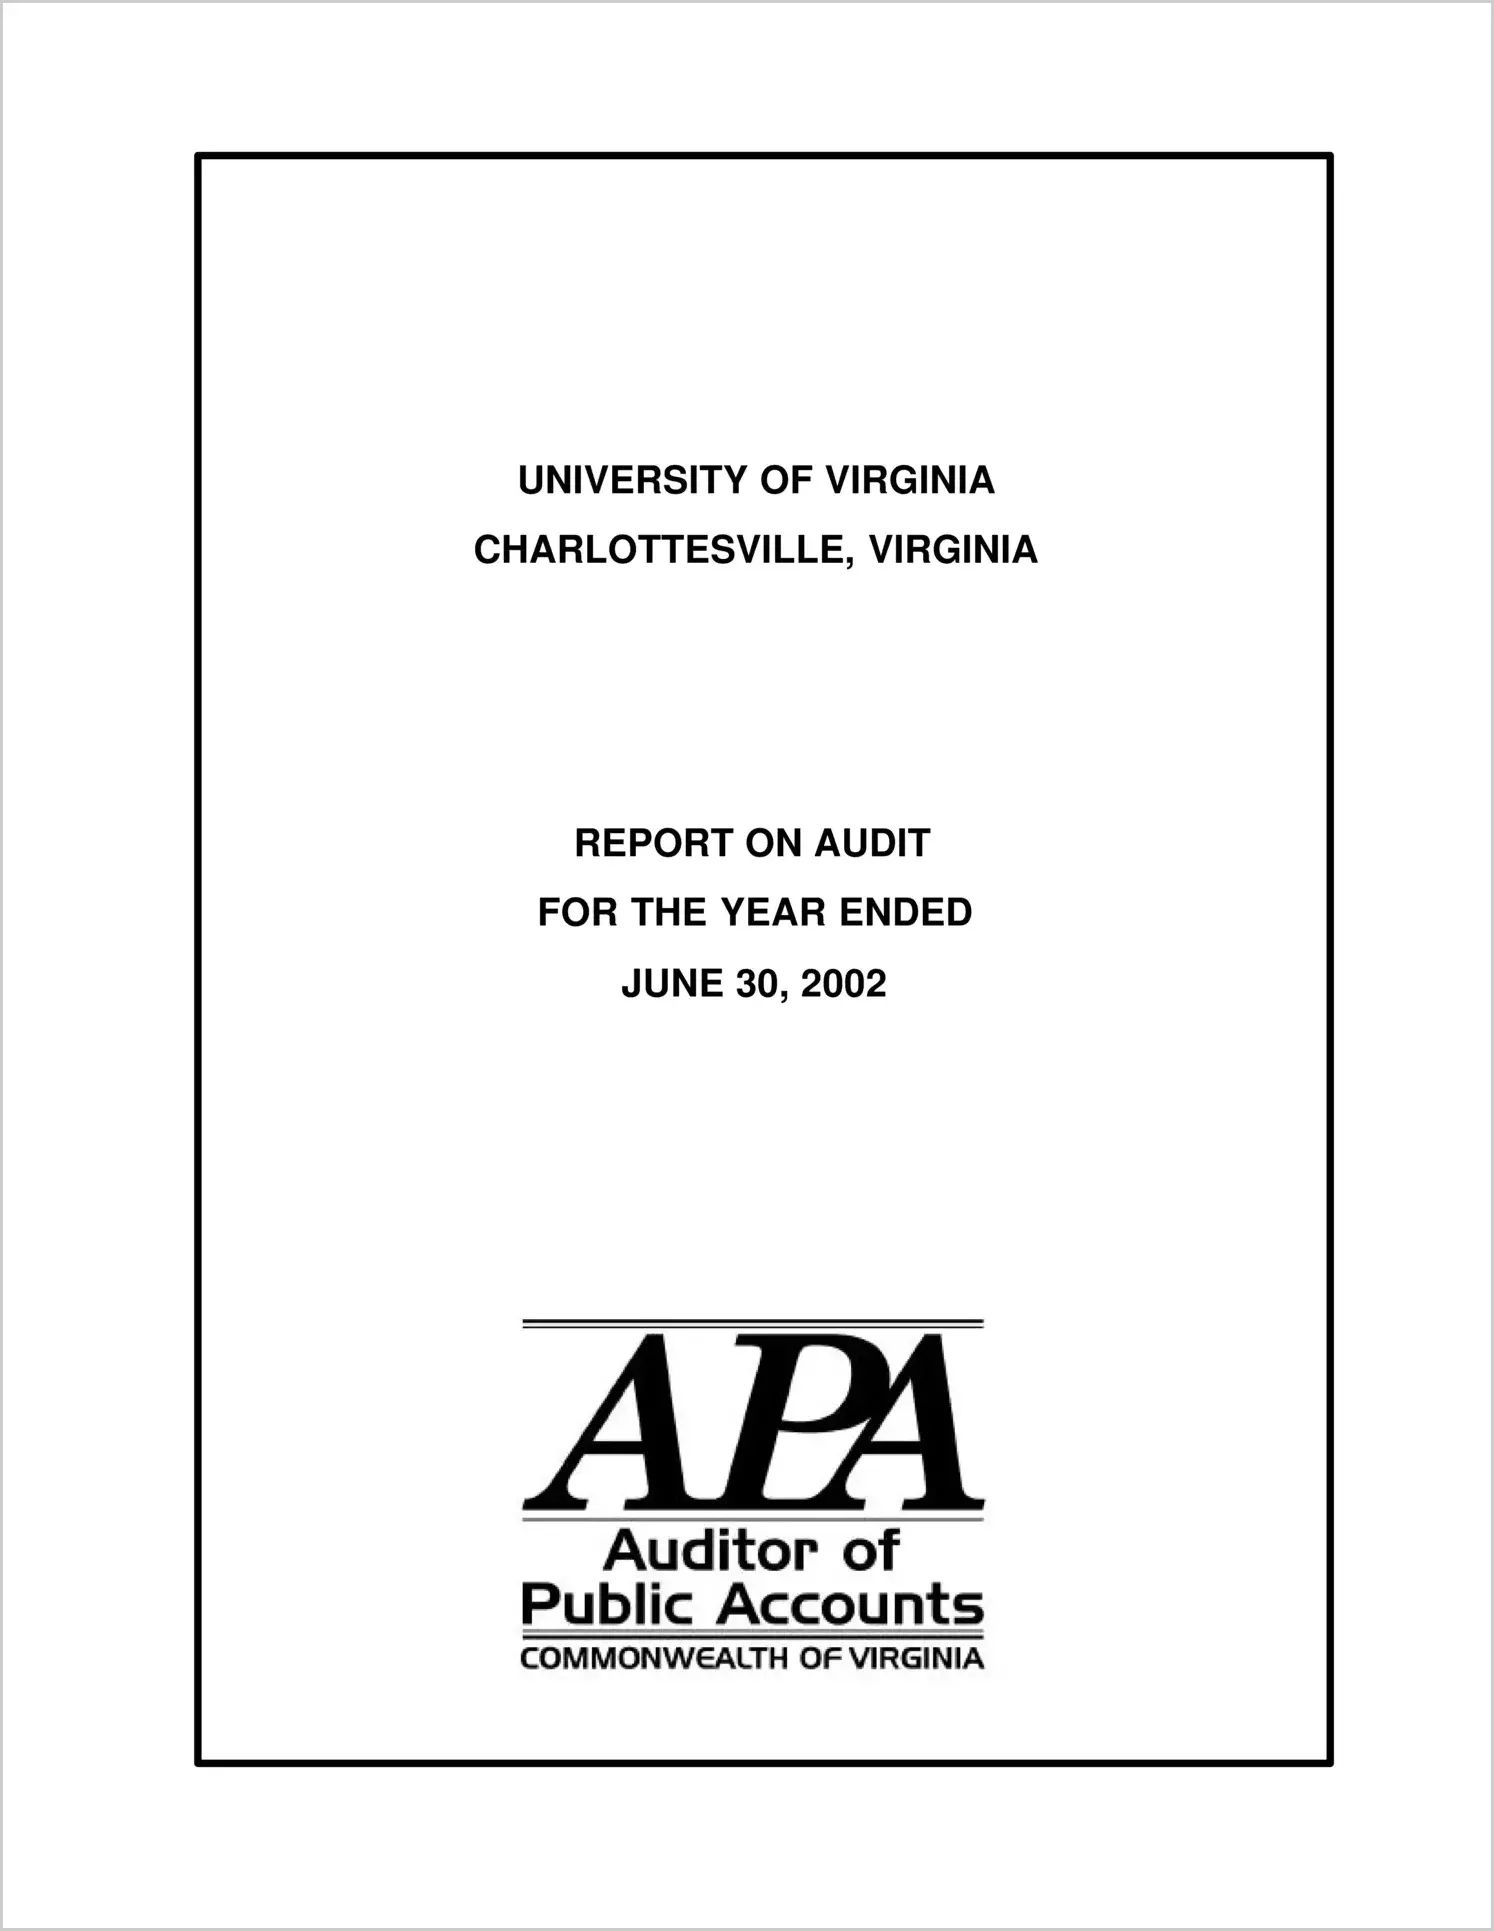 University of Virginia for the year ended June 30, 2002